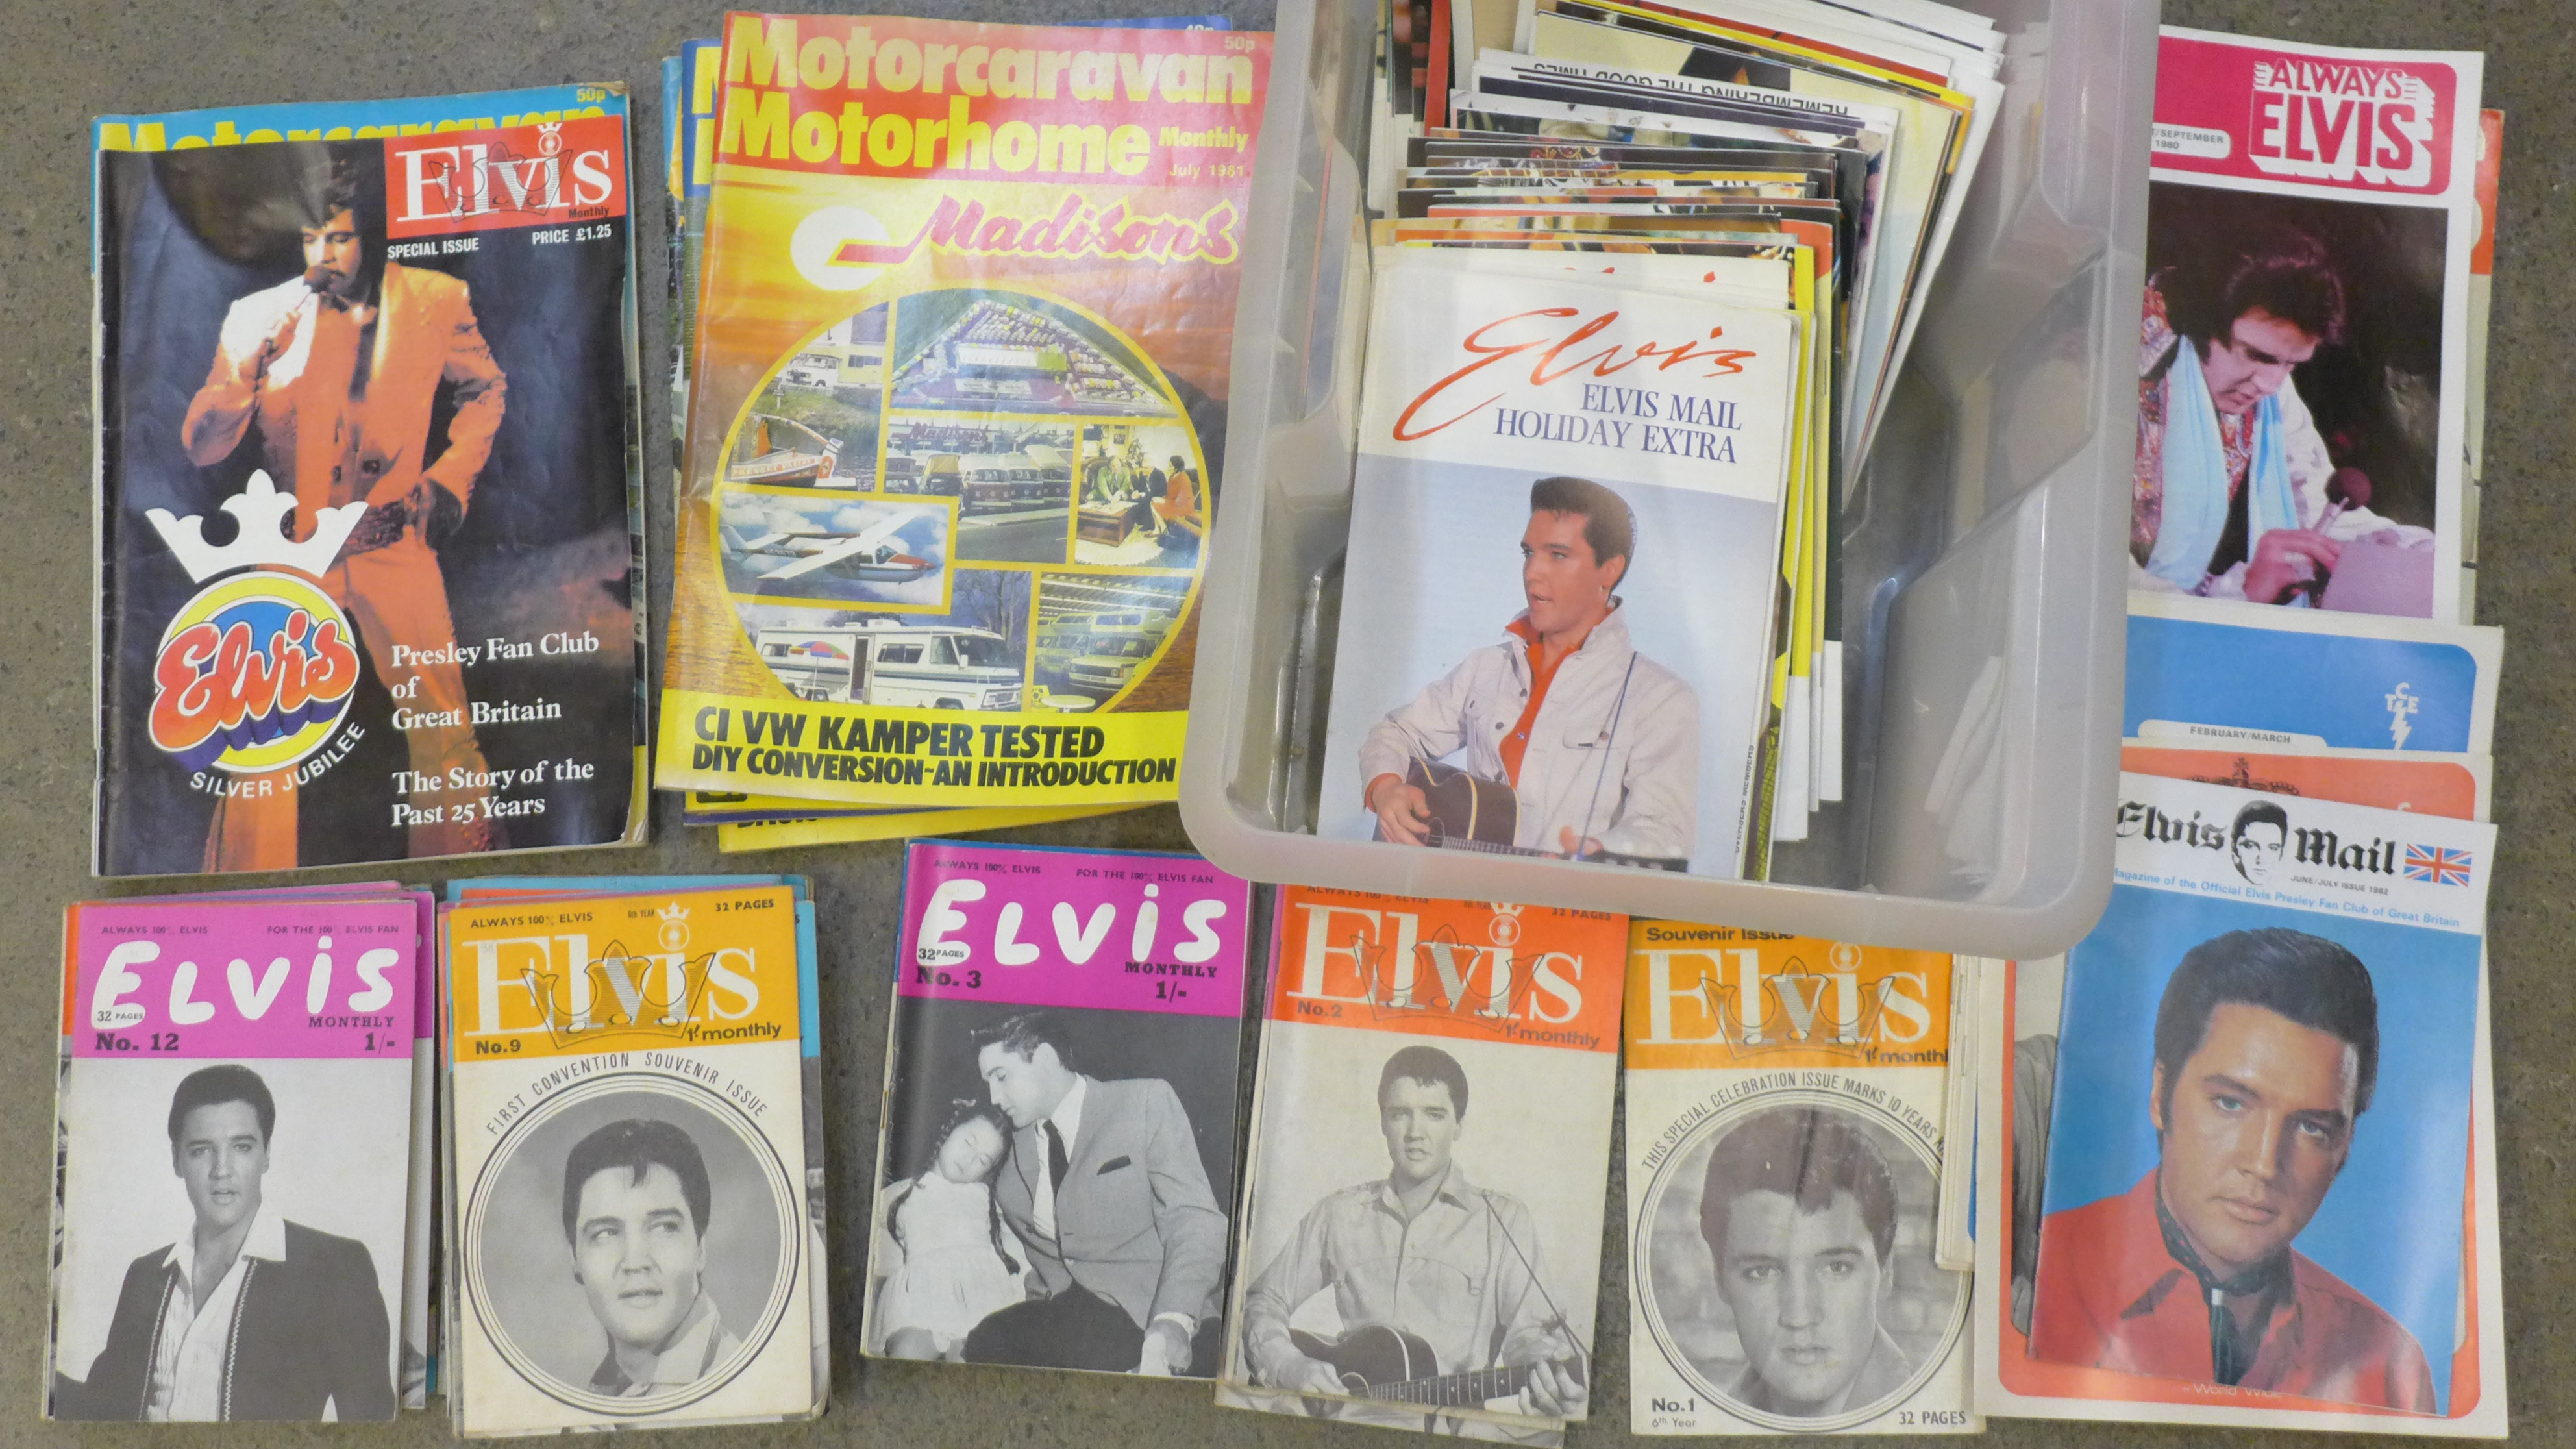 Elvis Presley magazines, Series 6 and other magazines